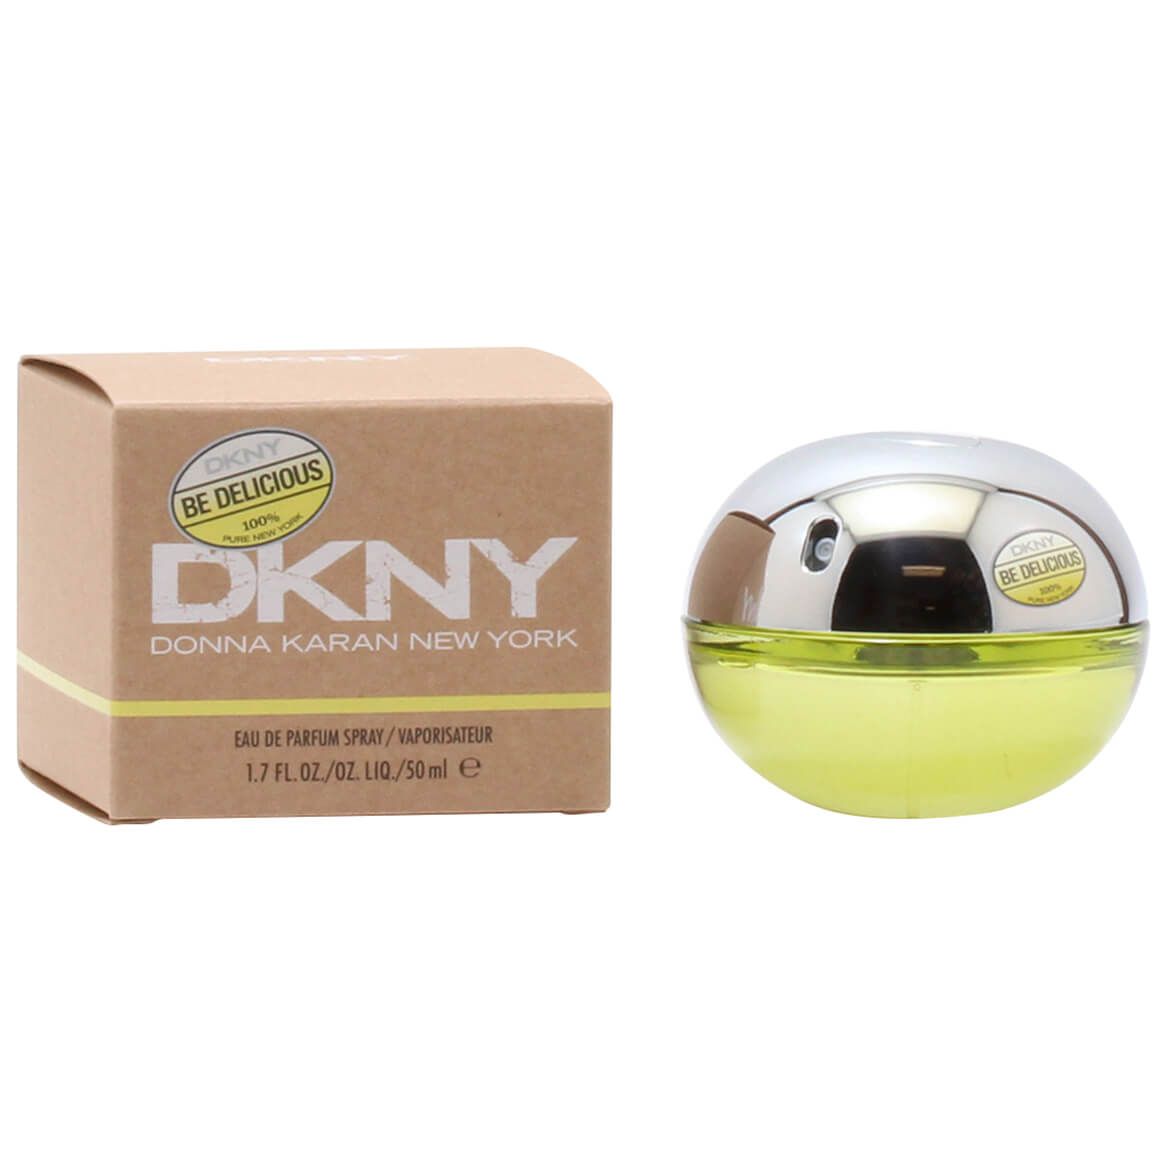 Be Delicious by DKNY for Women EDP, 1.7 fl. oz. + '-' + 377139